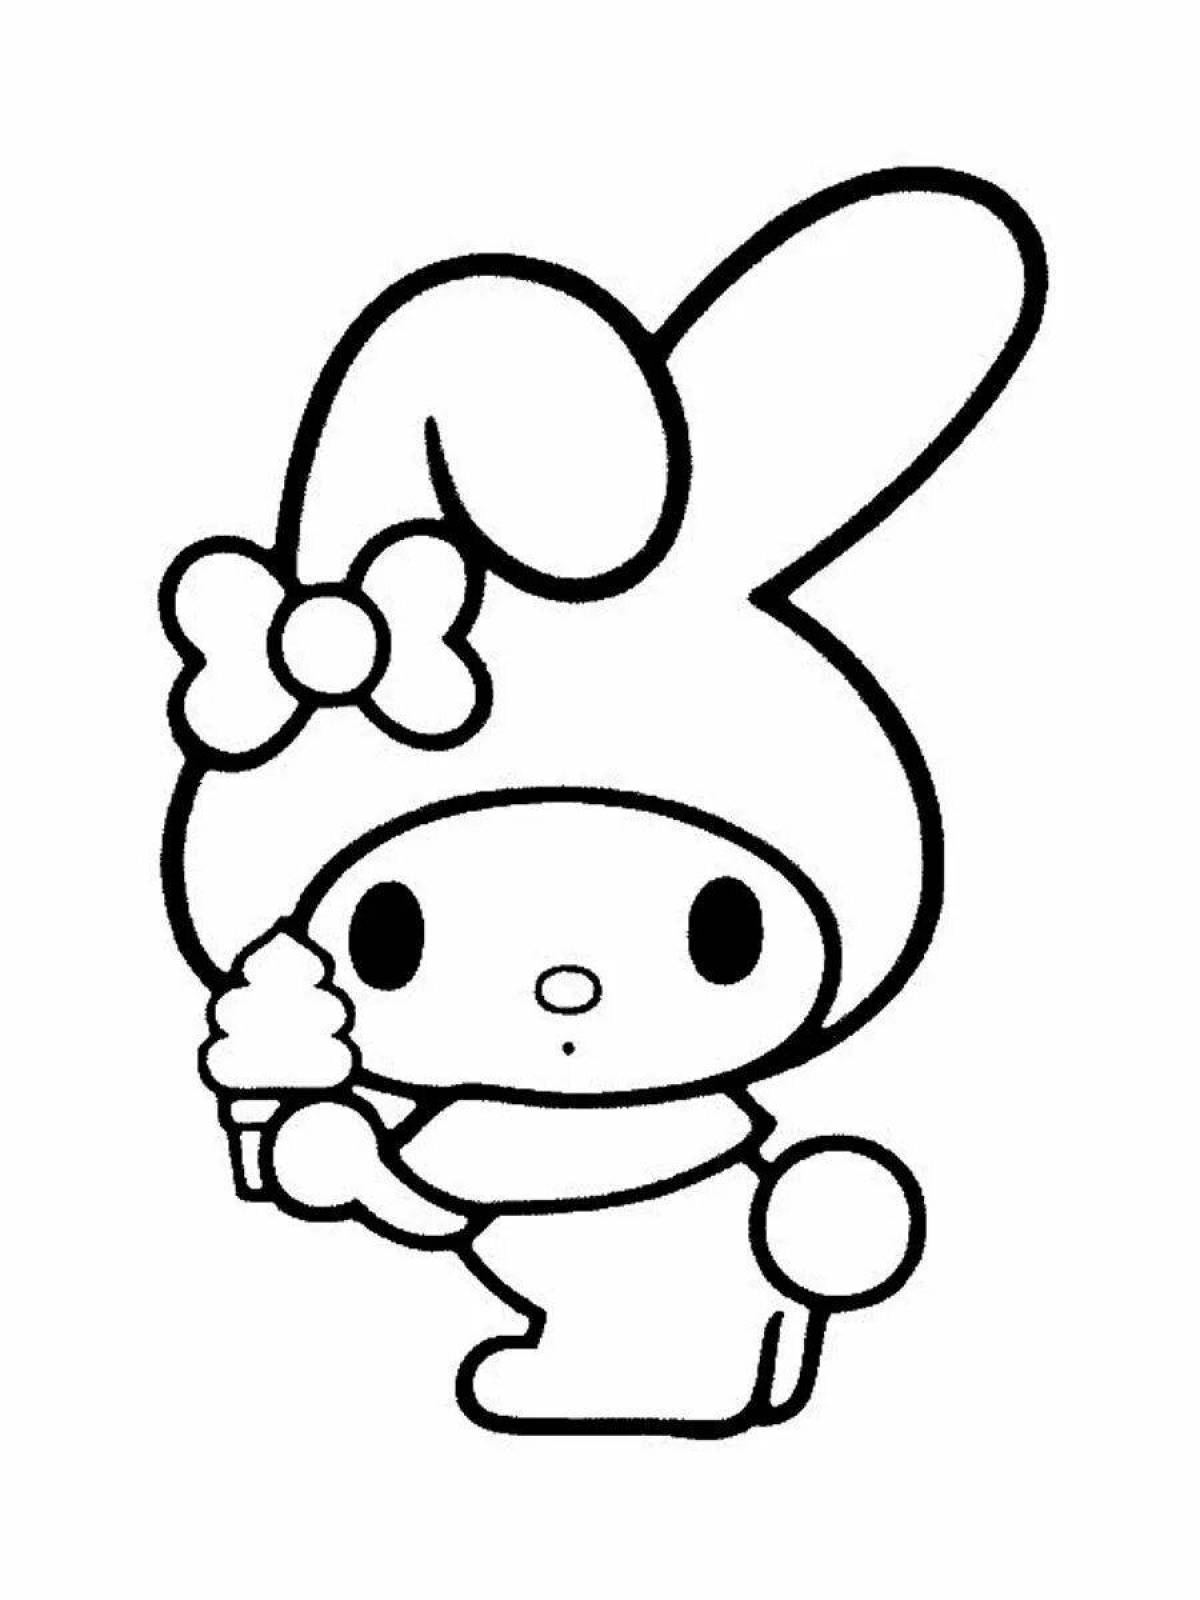 Delightful May melody hello kitty coloring page